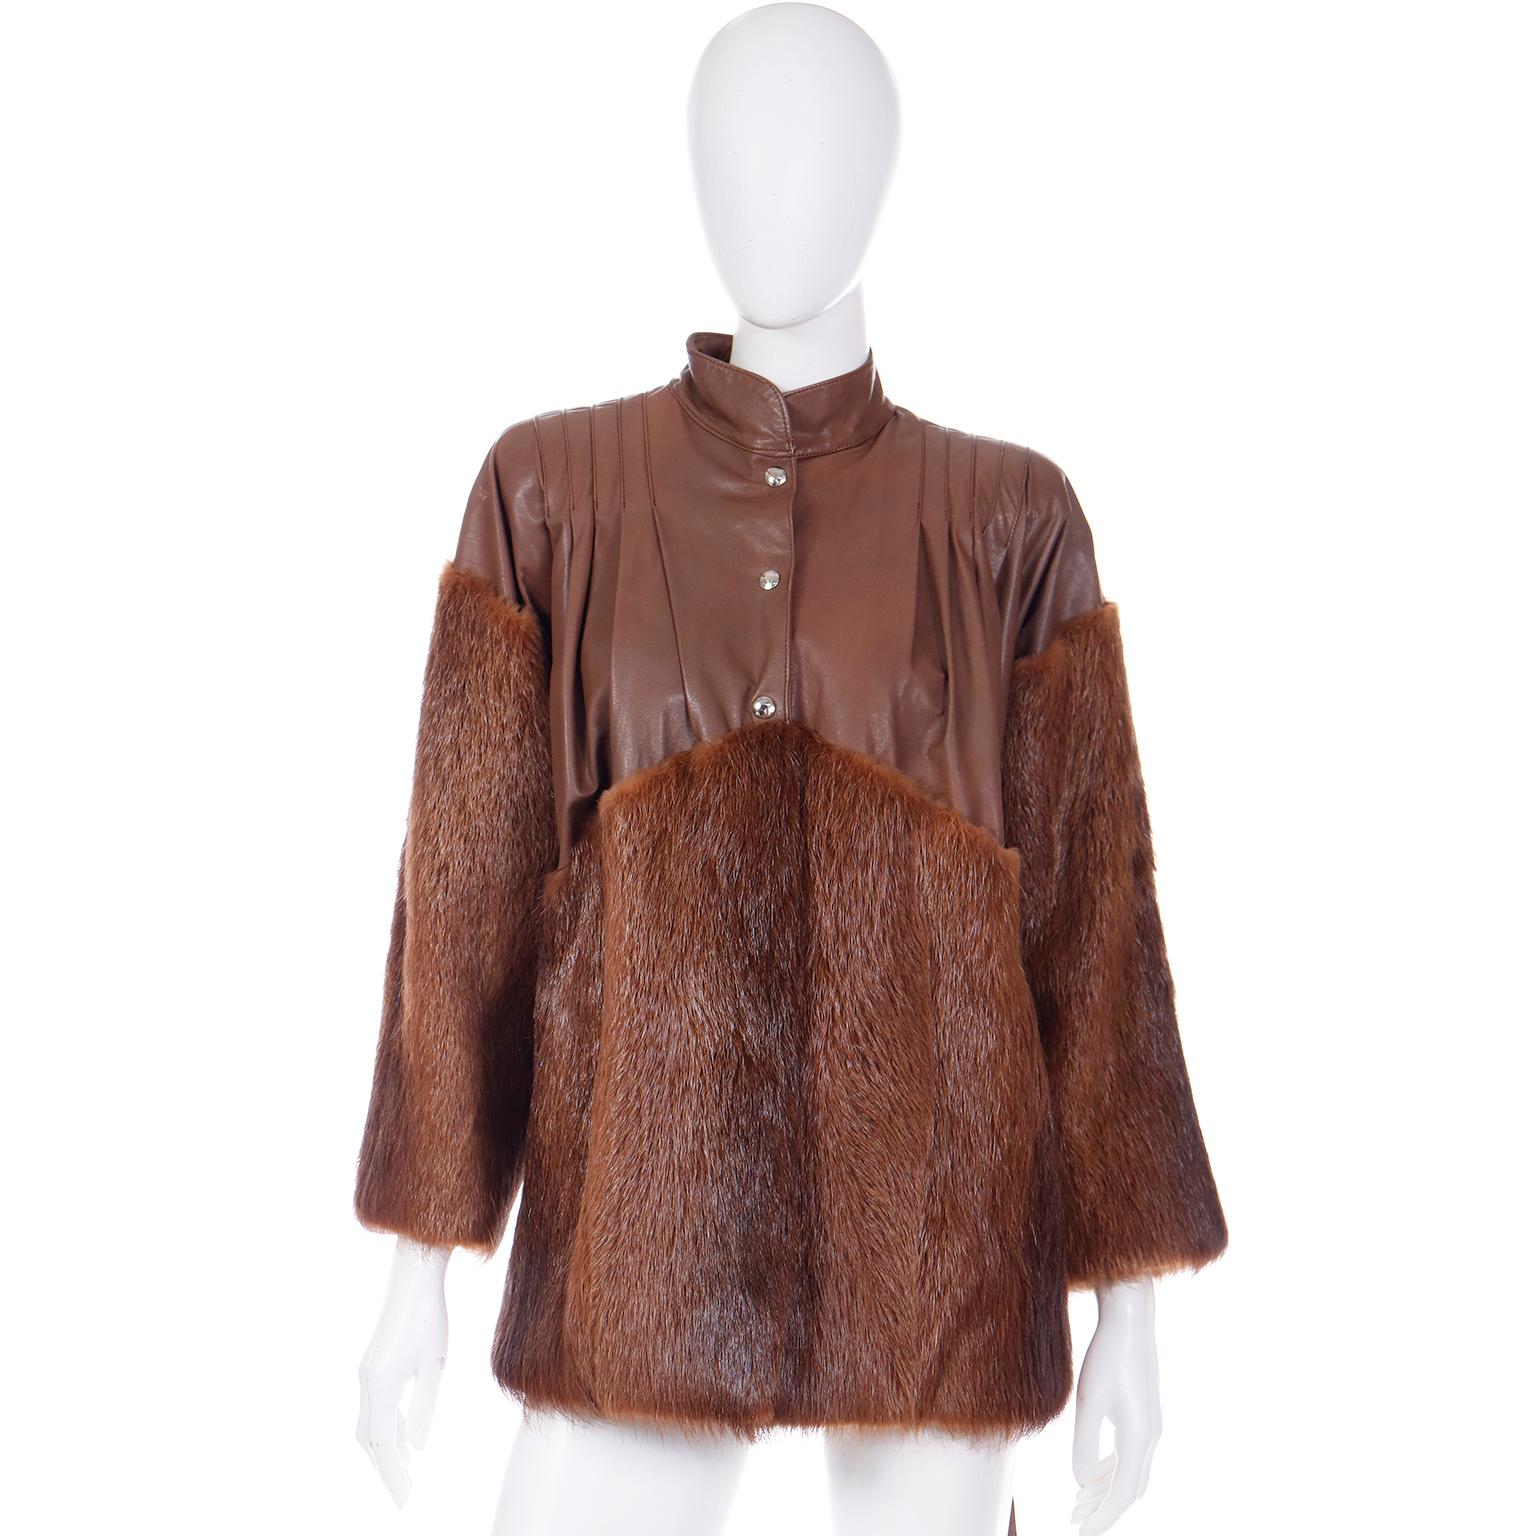 Yves Saint Laurent Fourrures Vintage Brown Leather and Fur Jacket With Belt 7